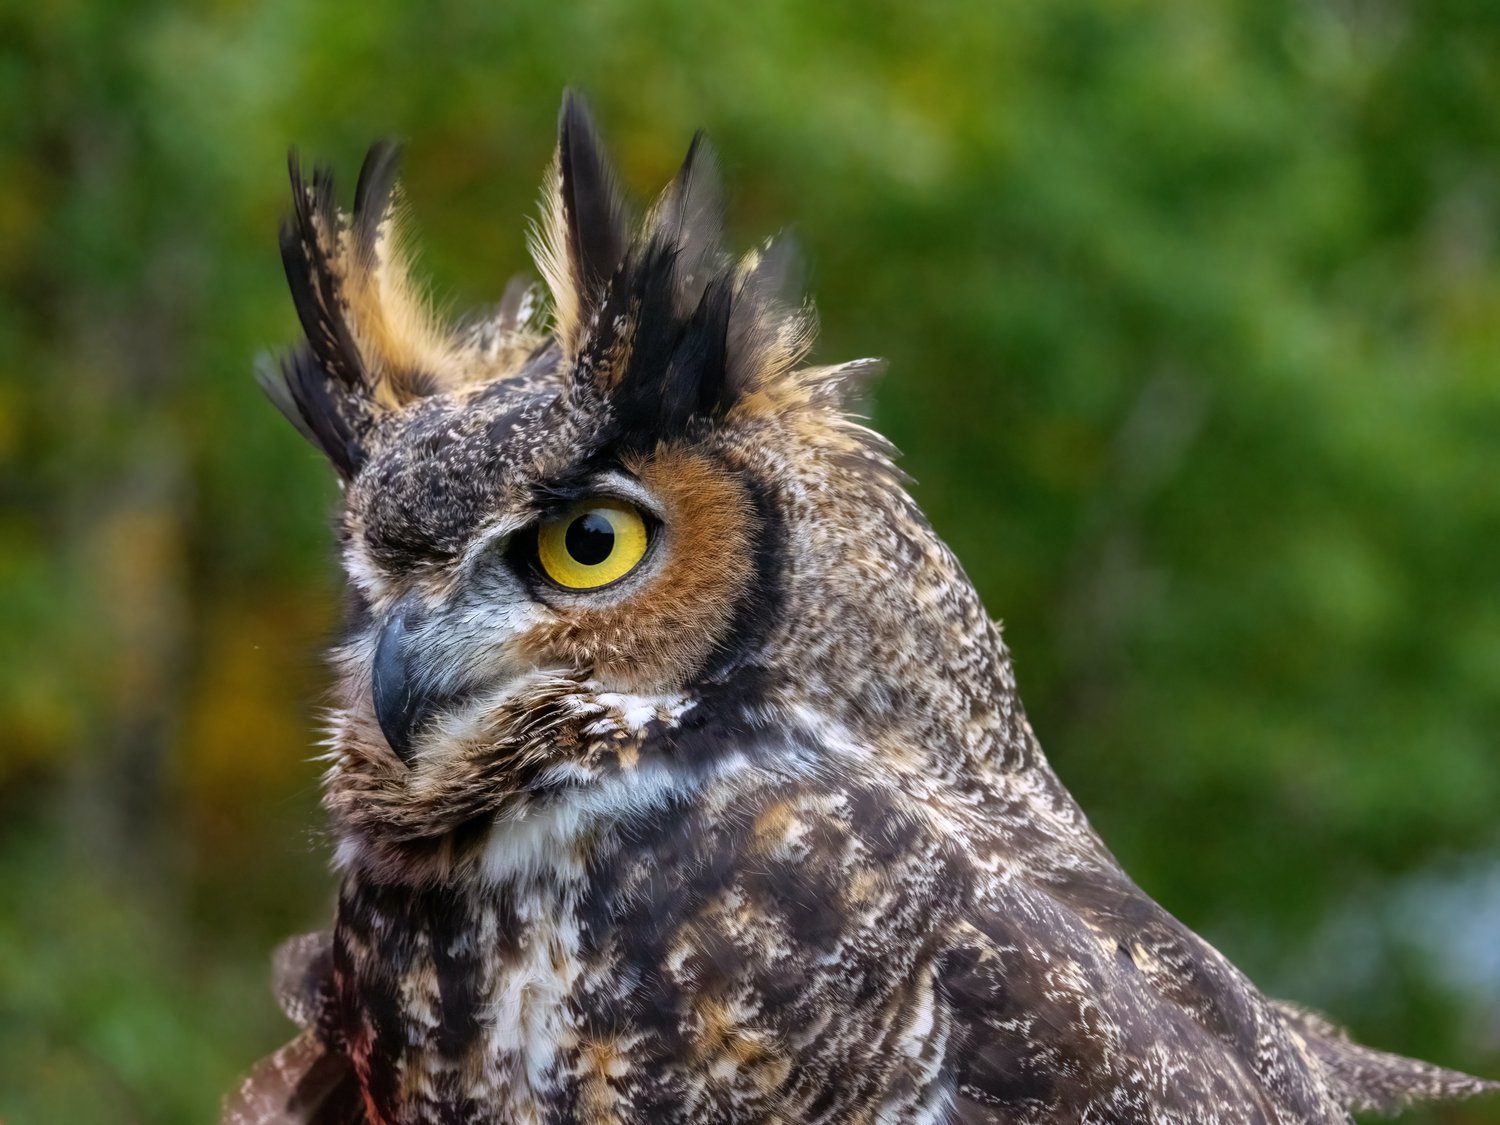 Many species of owls migrate south for the winter to escape the harsh weather and lack of prey. Not the great horned owl. It mates and nests here in the winter months.